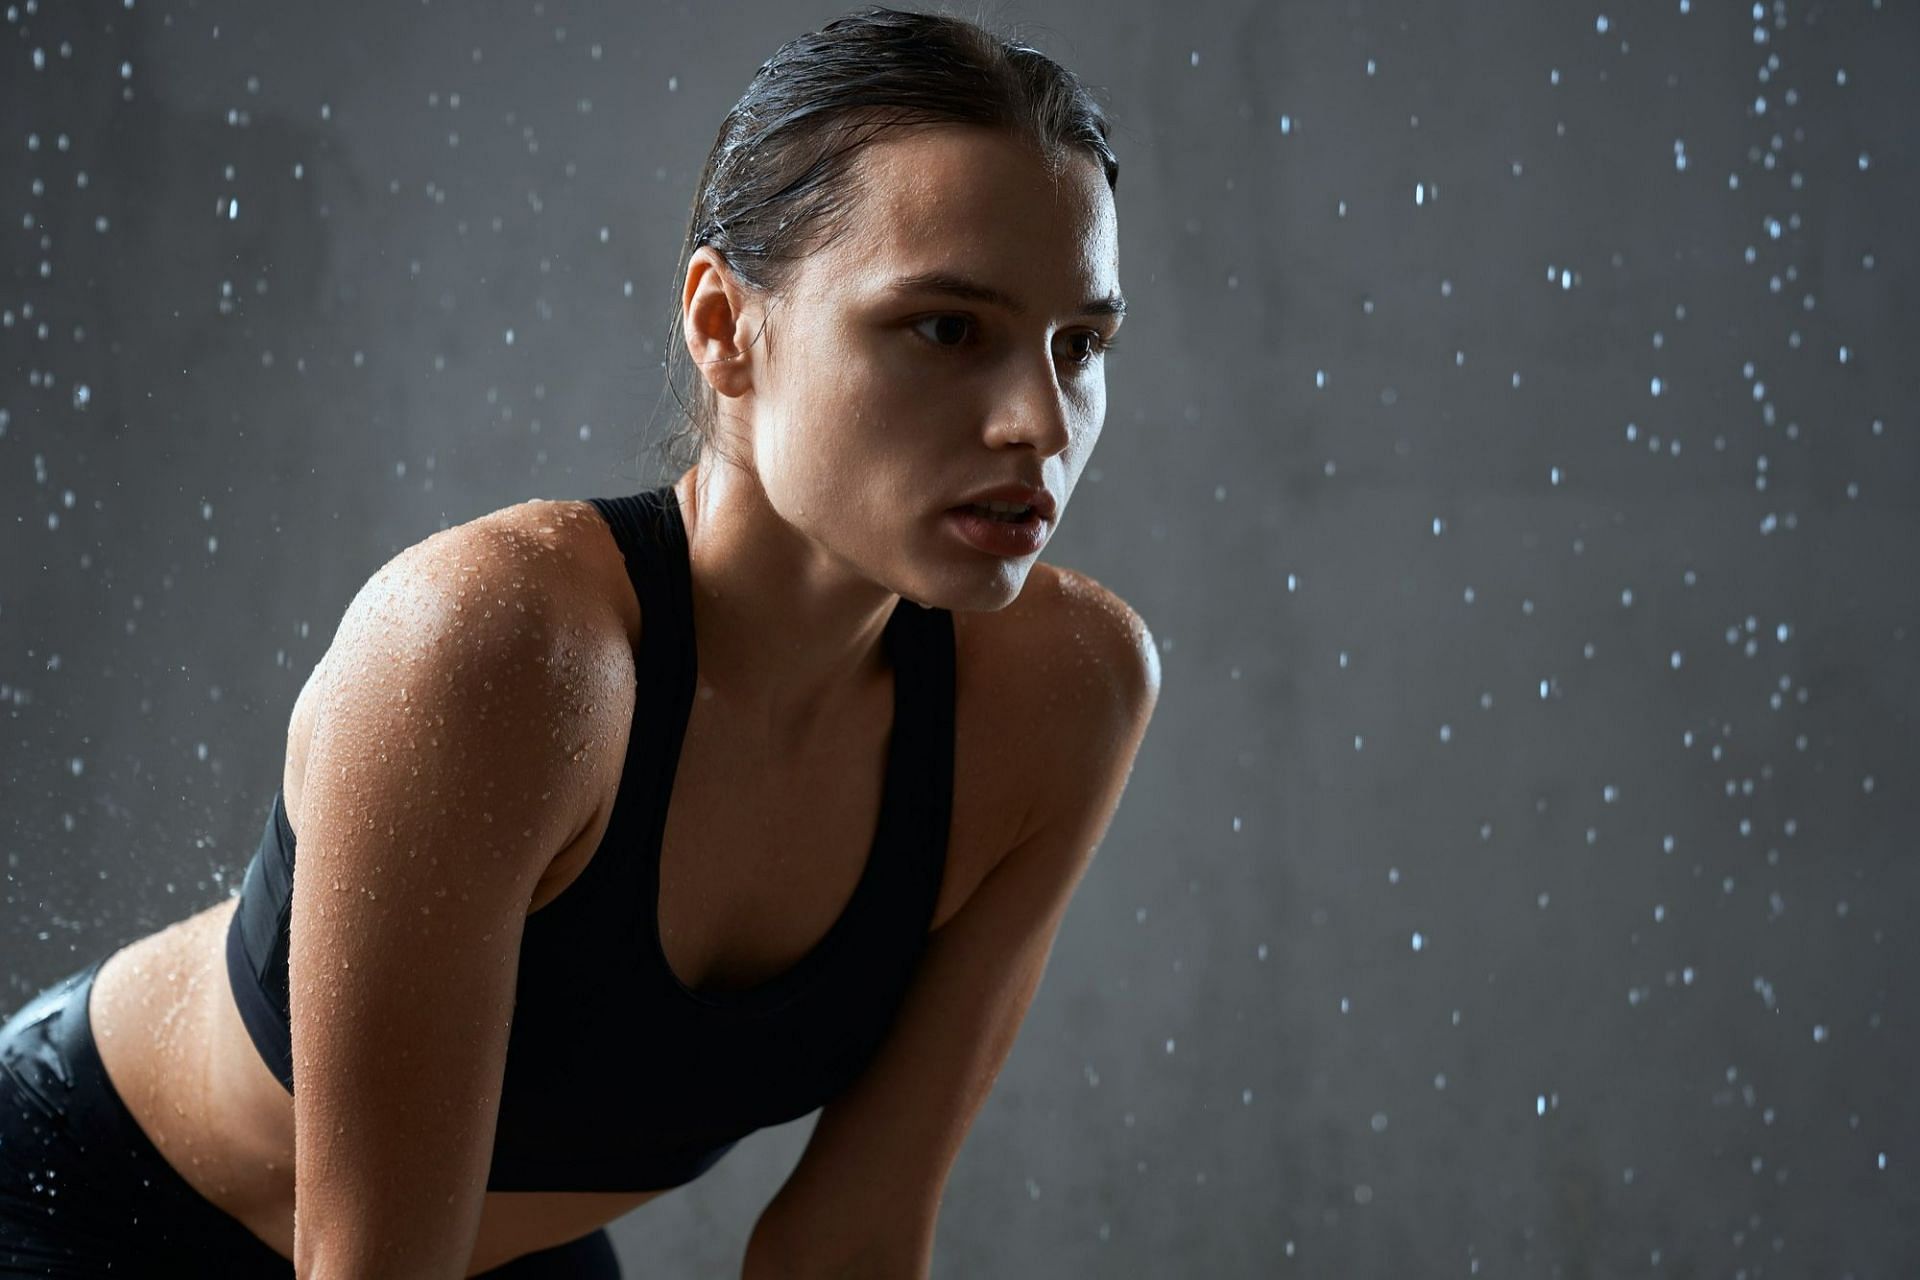 Sweating excessively during workout (Image by serhii_bobyk on Freepik)